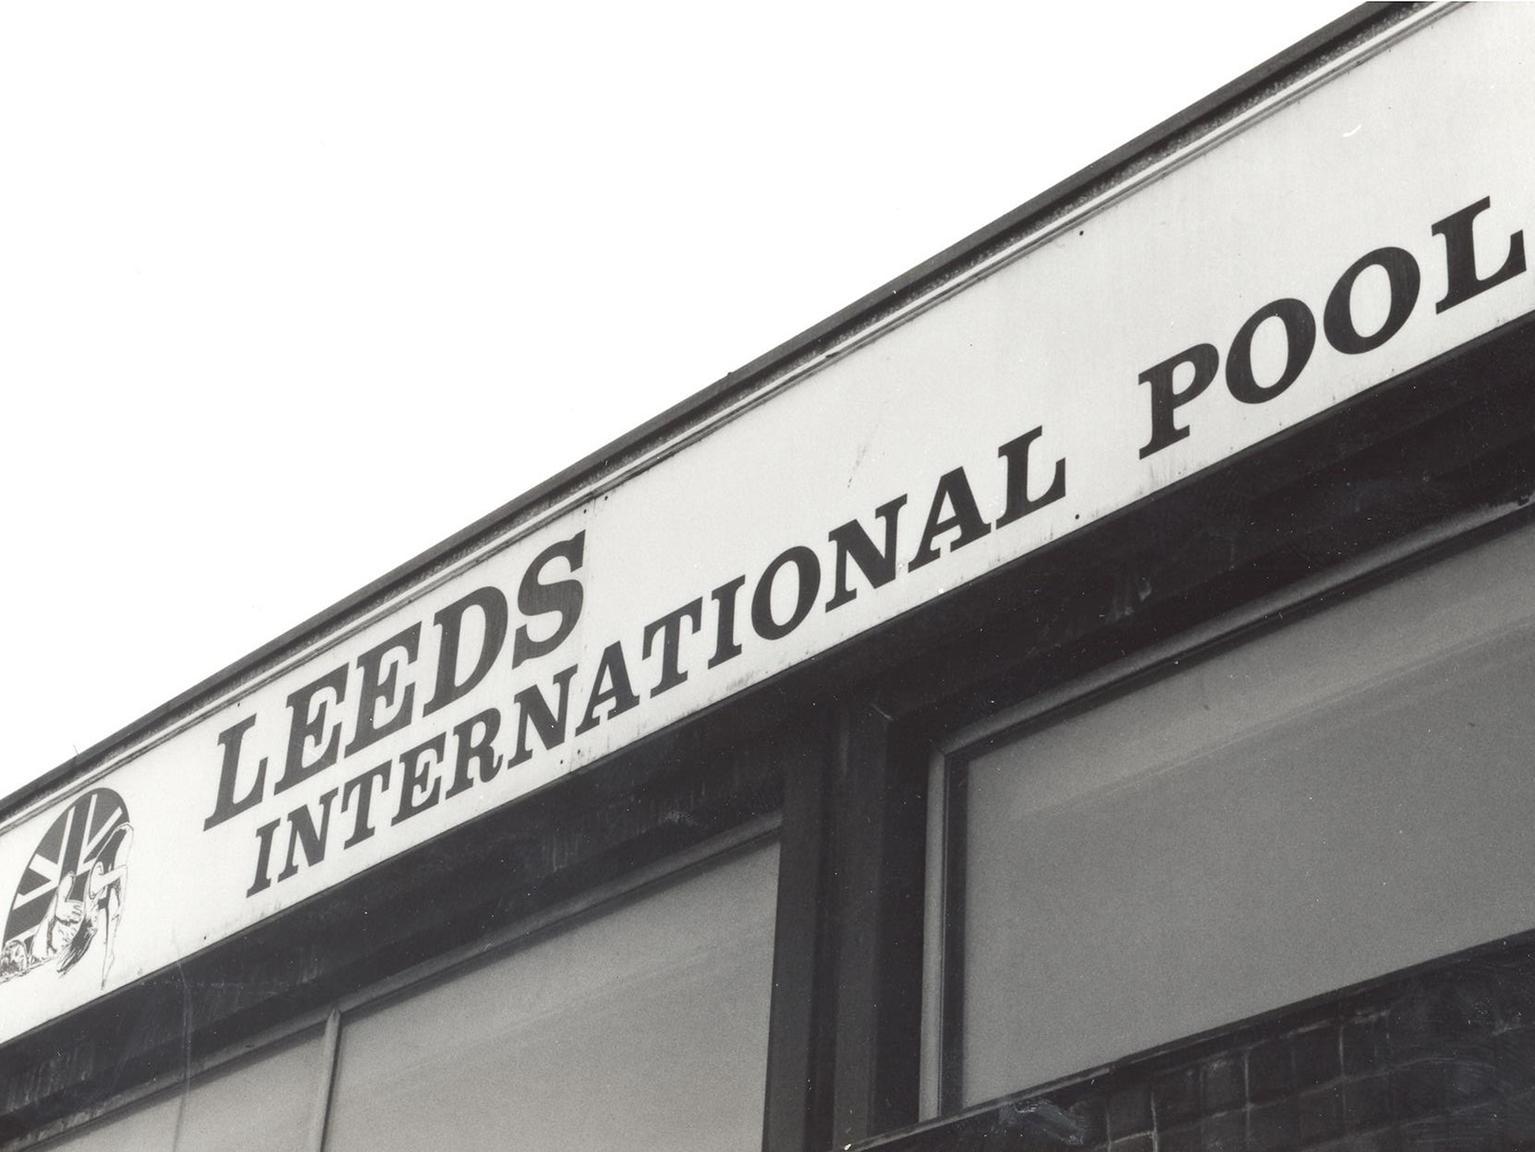 Share your memories of the Leeds International Pool with Andrew Hutchinson via email at: andrew.hutchinson@jpress.co,uk or tweet him - @AndyHutchYPN